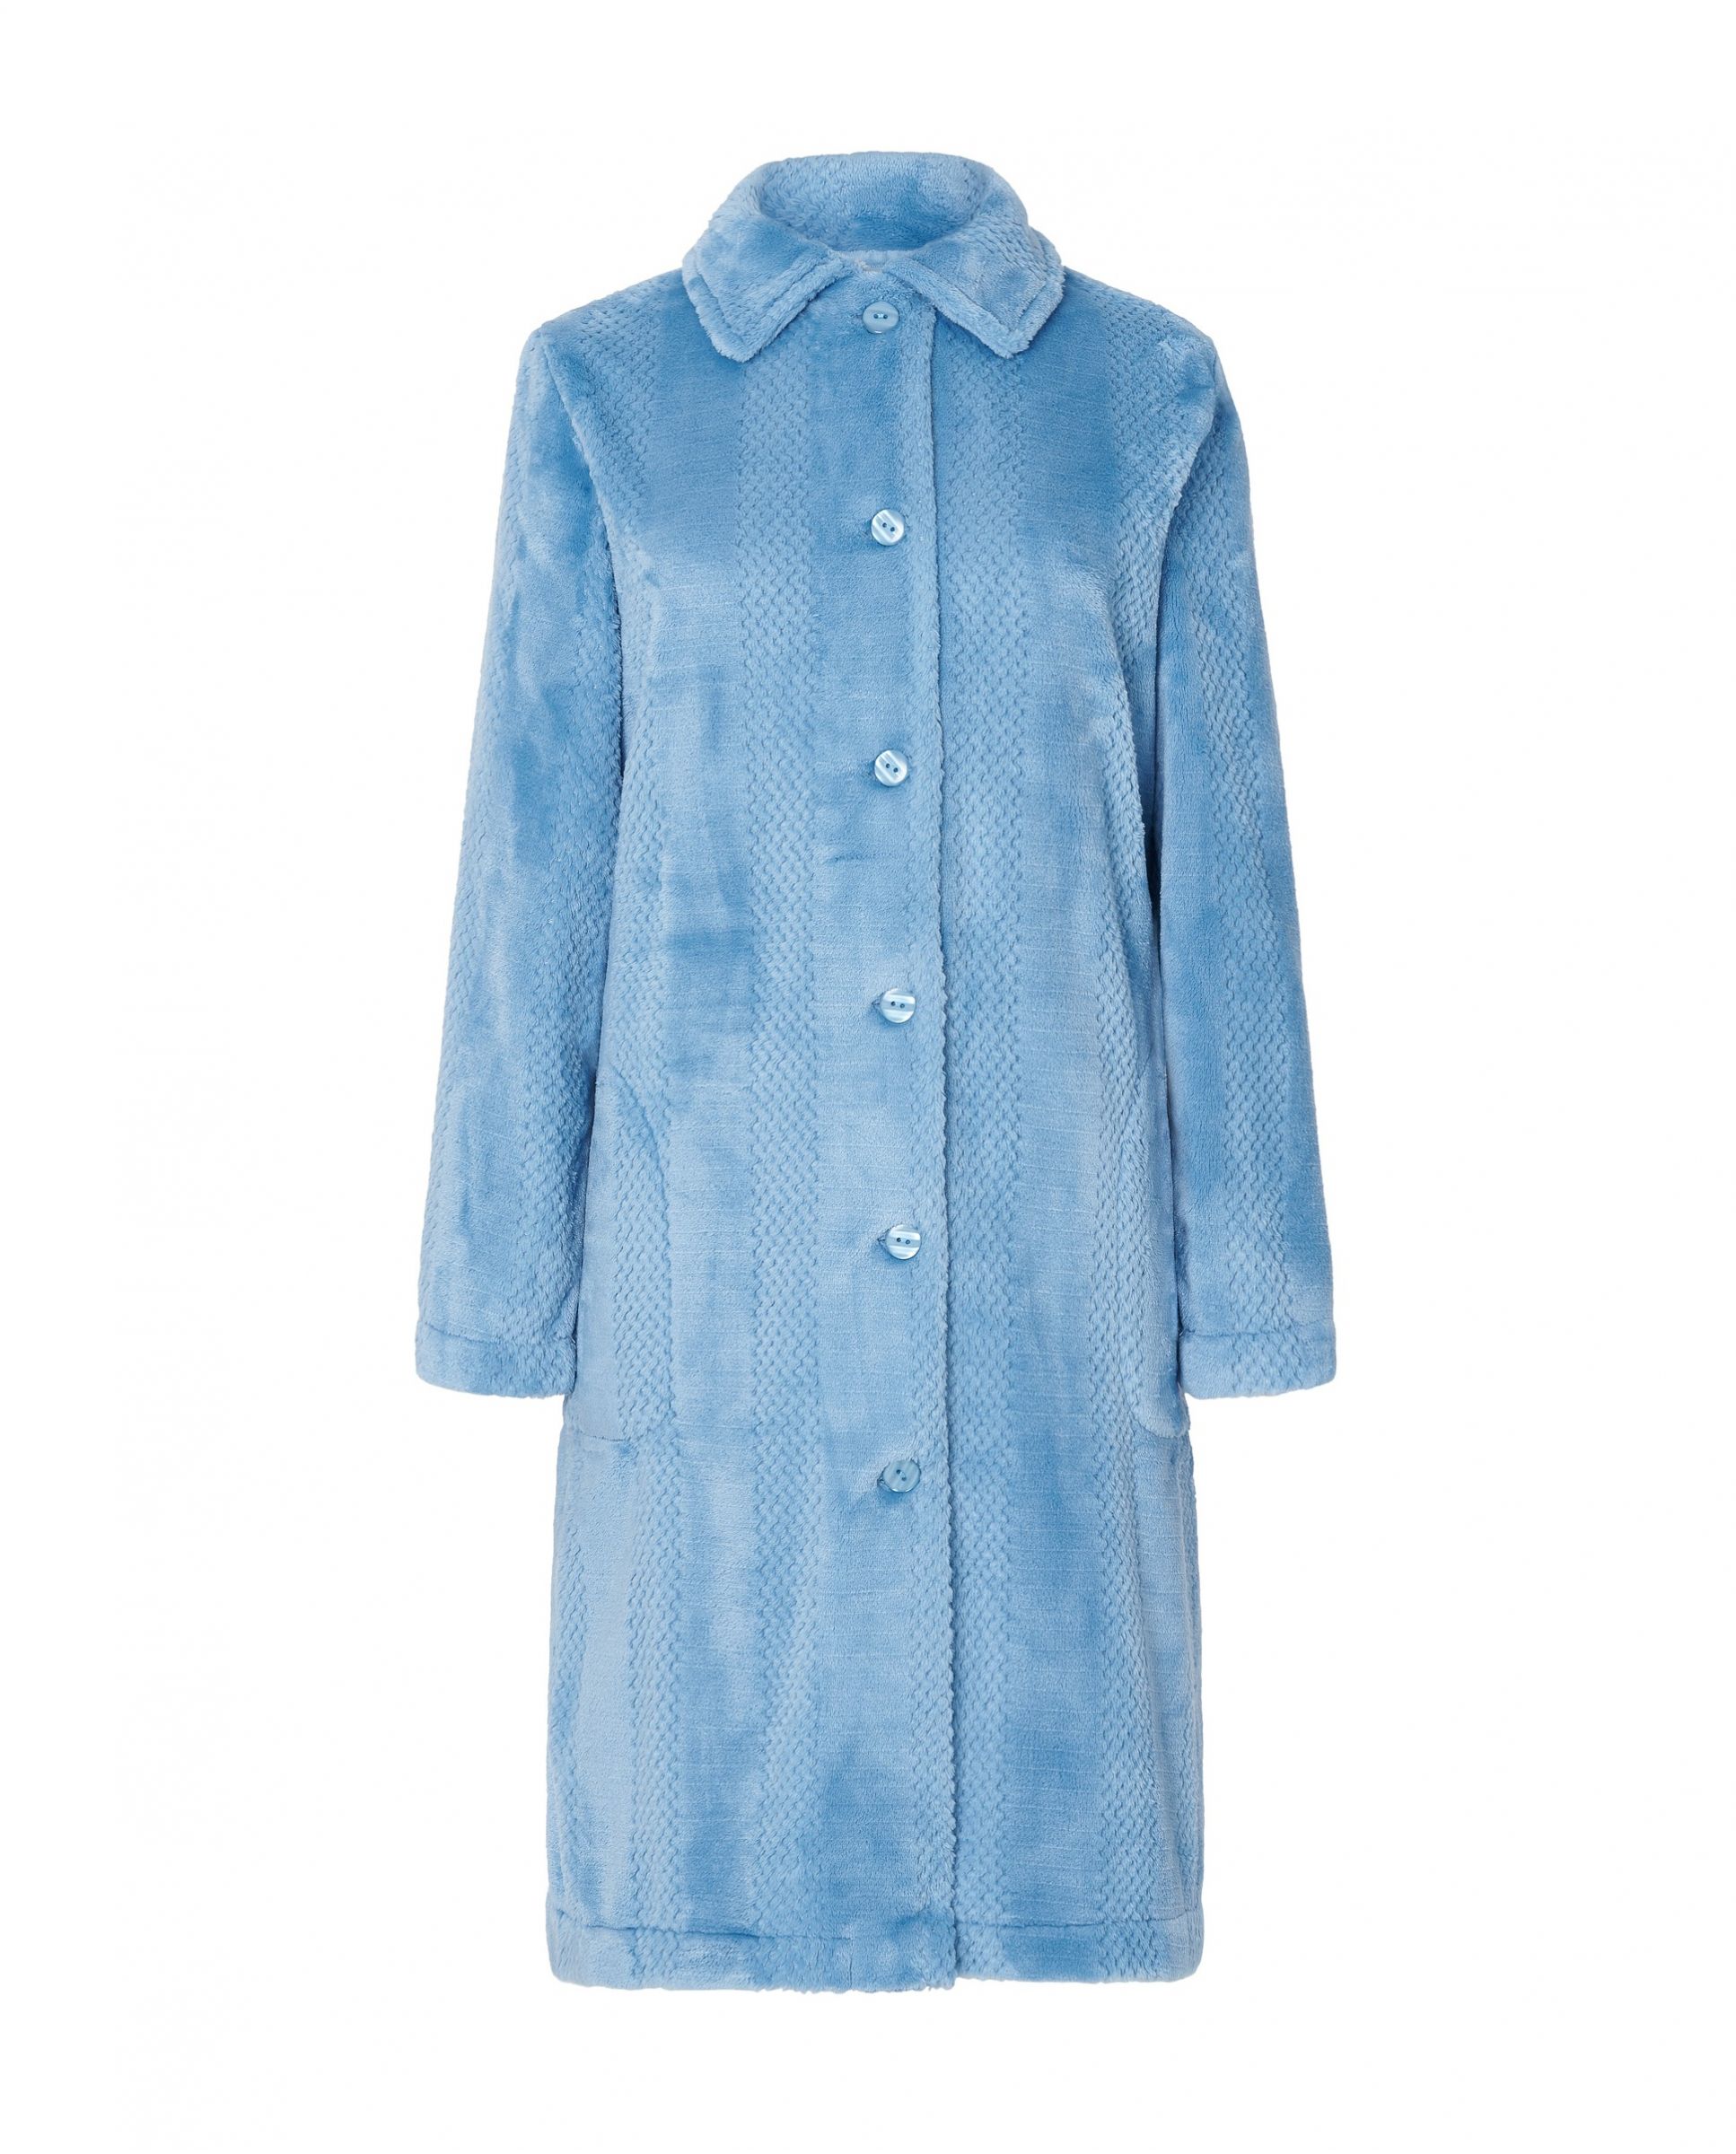 Lohe women's long dressing gown, open with buttons, long sleeves, striped jacquard fabric, and side pockets.